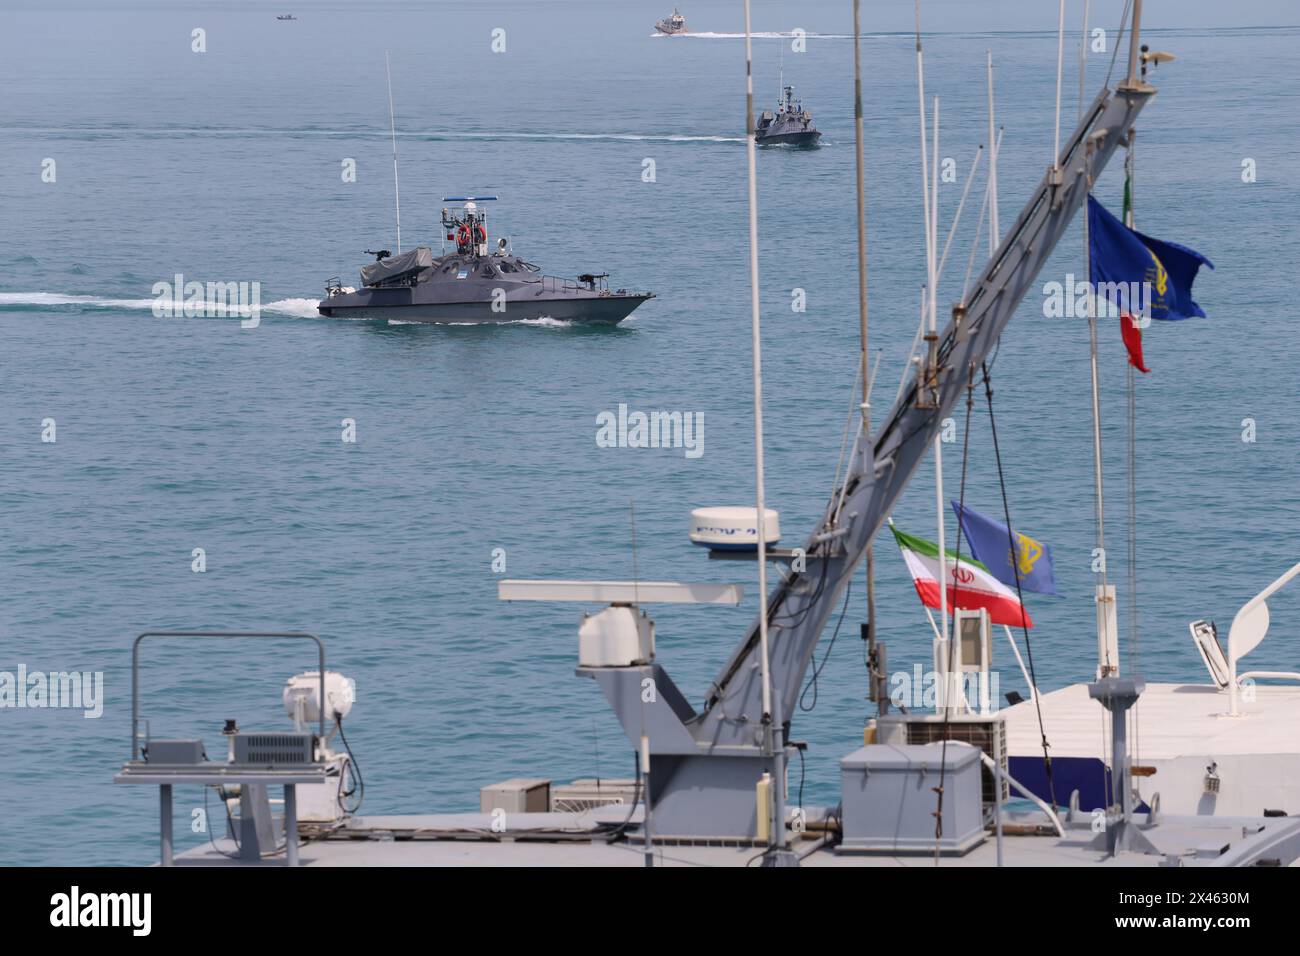 April 29, 2024, Persian Gulf, Bushehr, Iran: The Islamic Revolutionary Guard Corps (IRGC) speed boats are sailing along the Persian Gulf during the IRGC marine parade to commemorate Persian Gulf National Day near the Bushehr nuclear power plant in the seaport city of Bushehr, Bushehr province, in the south of Iran. Iran celebrates the anniversary of the liberation of the country's south from Portuguese occupation in 1622 as 'Persian Gulf National Day' in Bushehr on April 29, 2024. The date coincides with the anniversary of a successful military campaign by Shah Abbas, the Great of Persia, in t Stock Photo